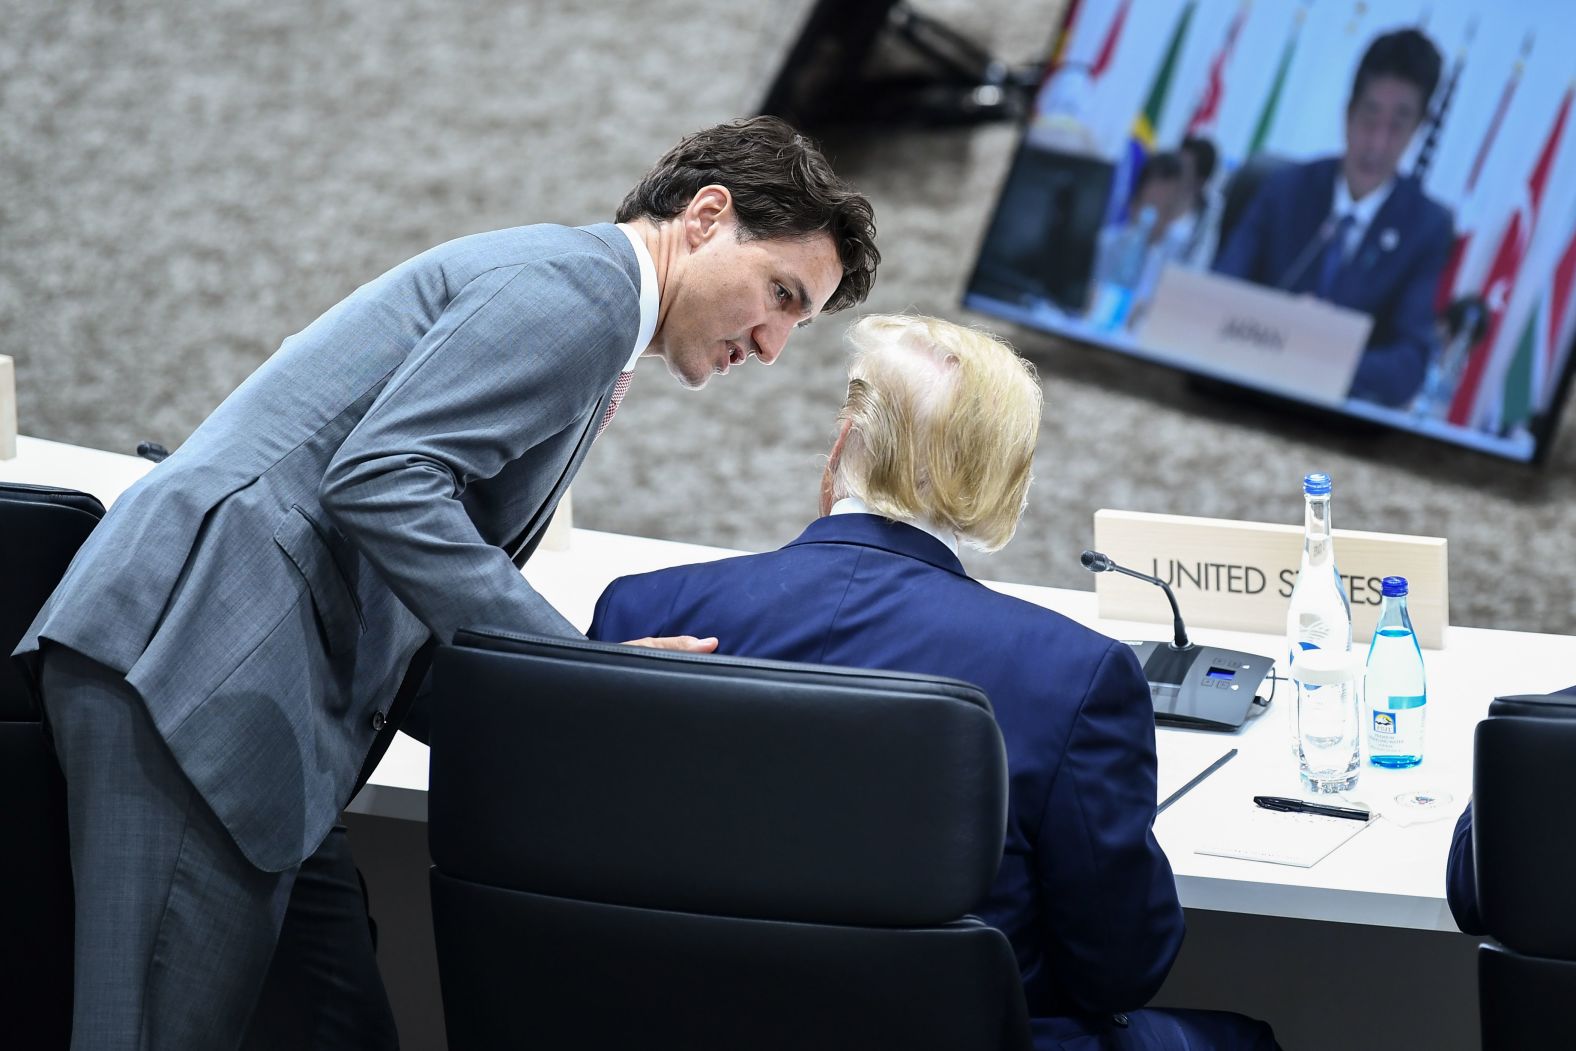 Canadian Prime Minister Justin Trudeau speaks with US President Donald Trump during a session at the G20 summit on Saturday.